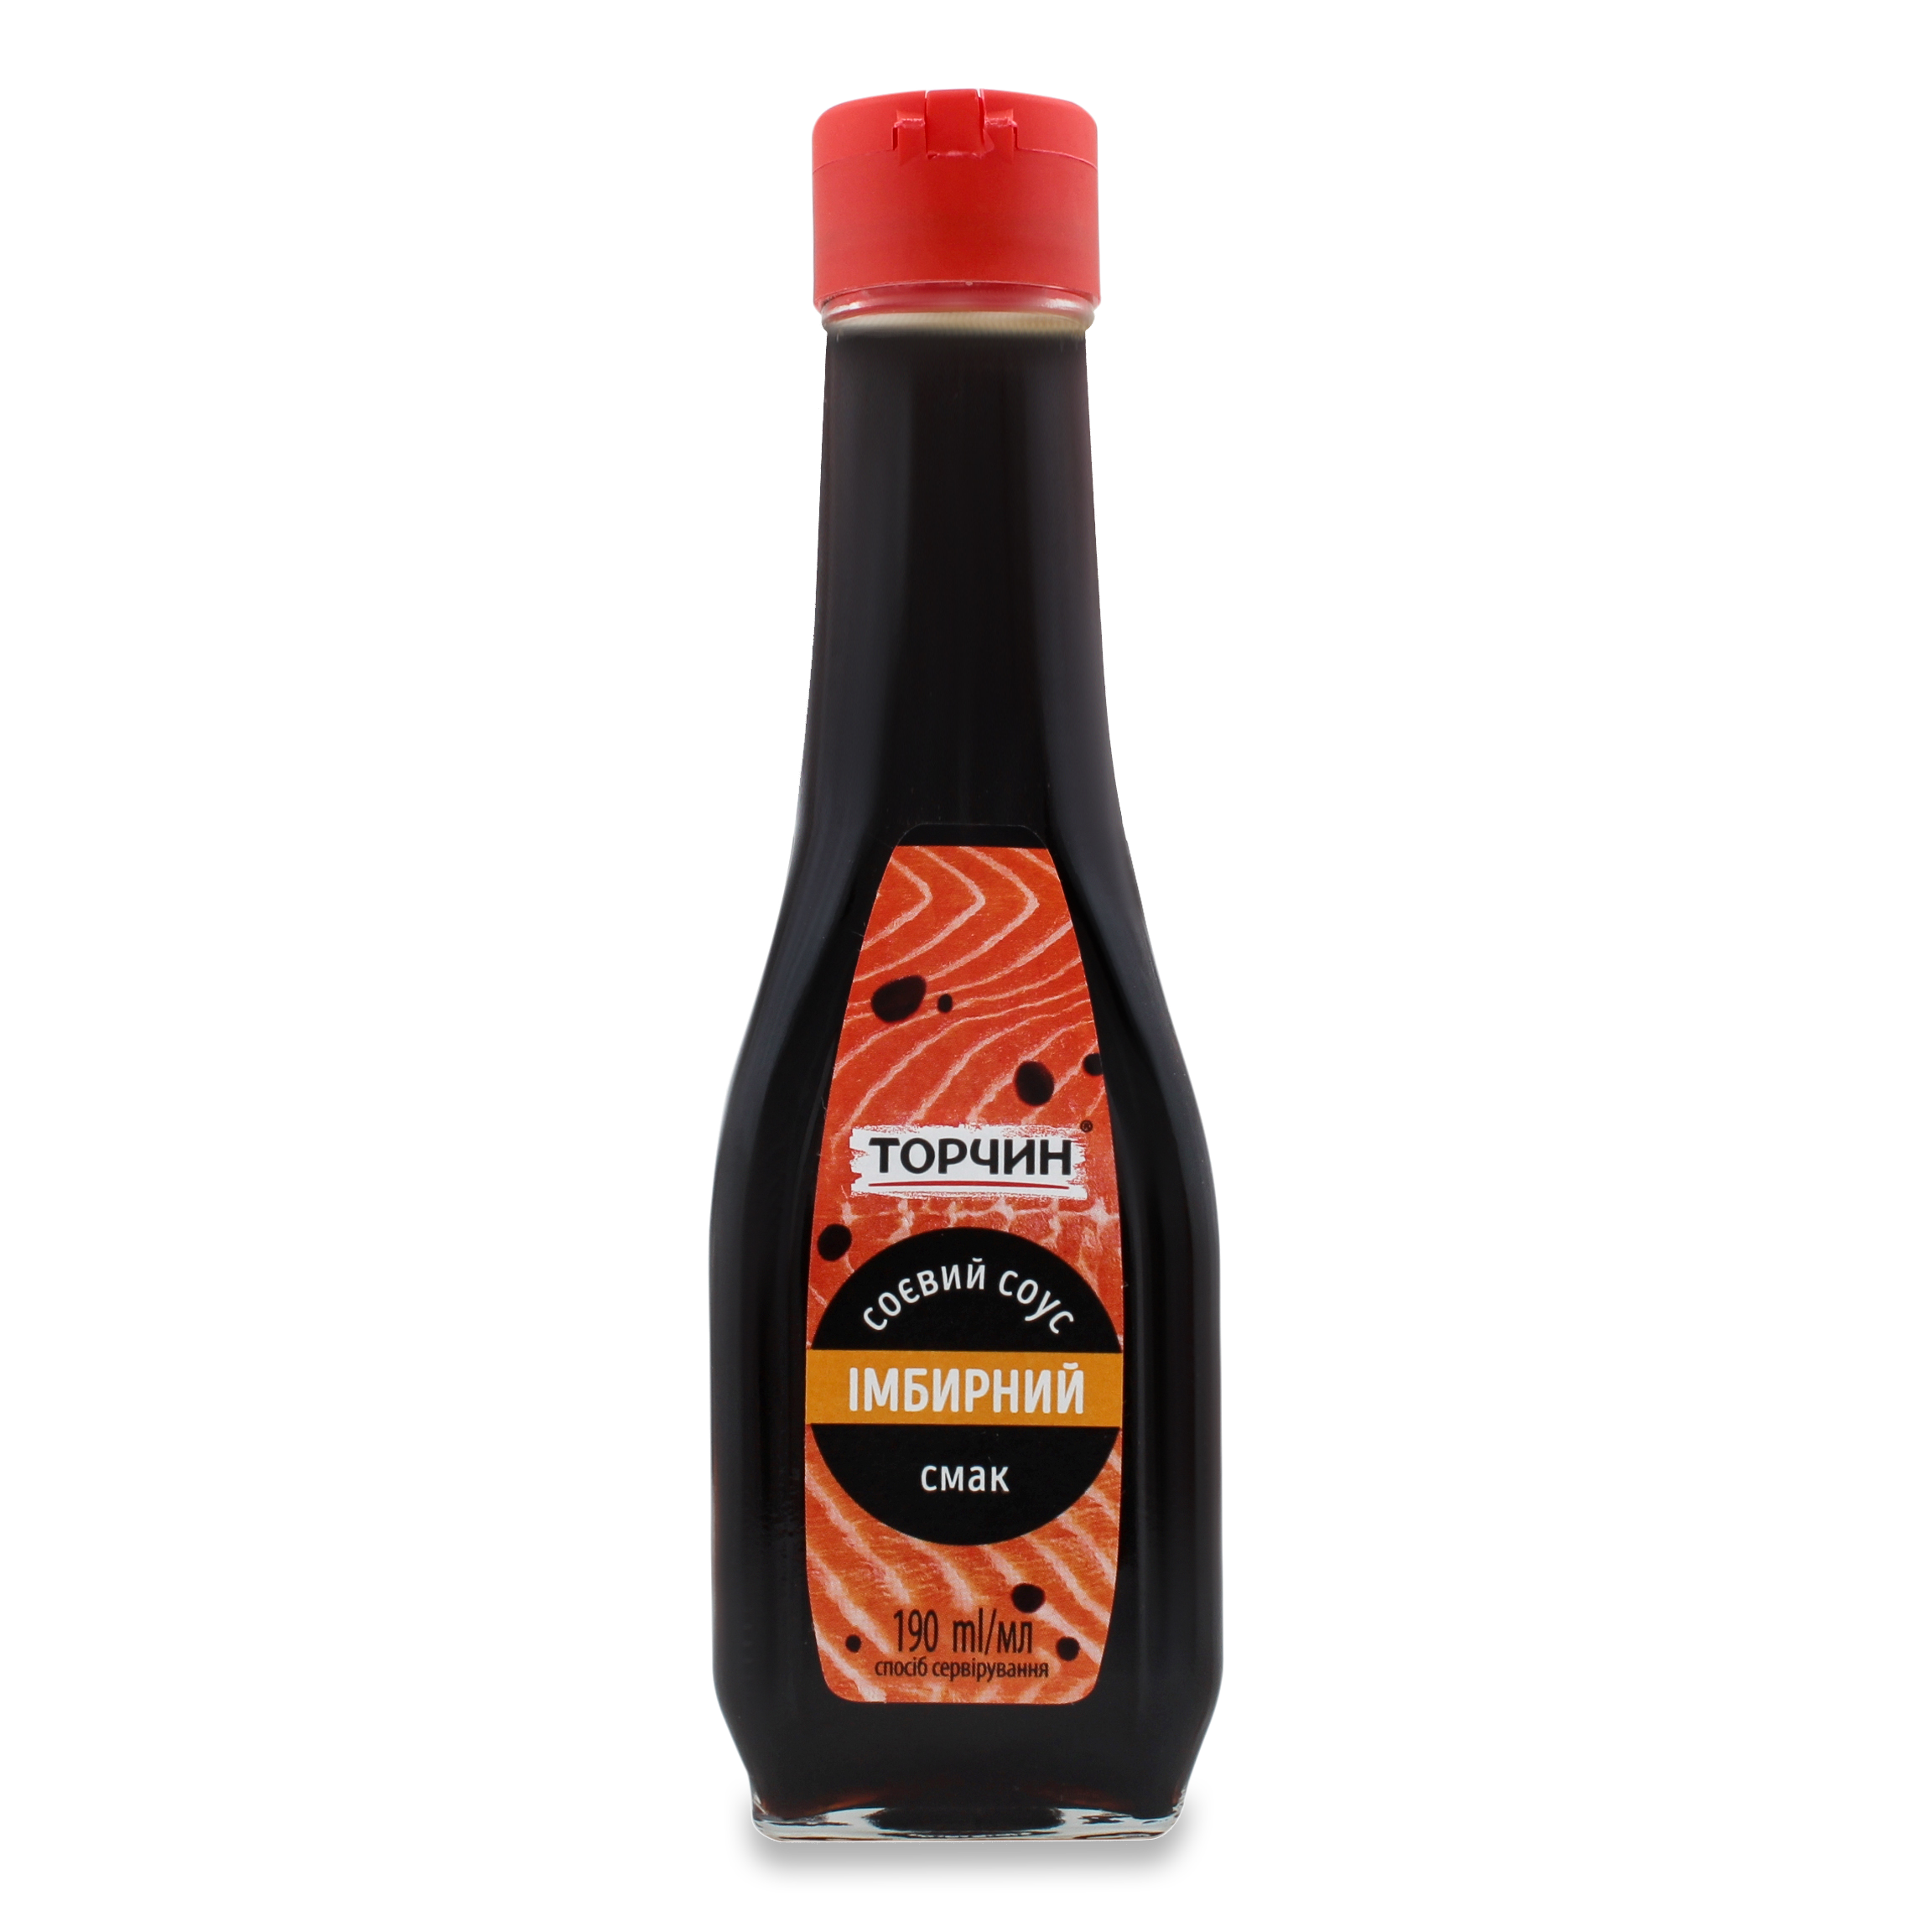 Torchyn Ginger soy sauce 190ml